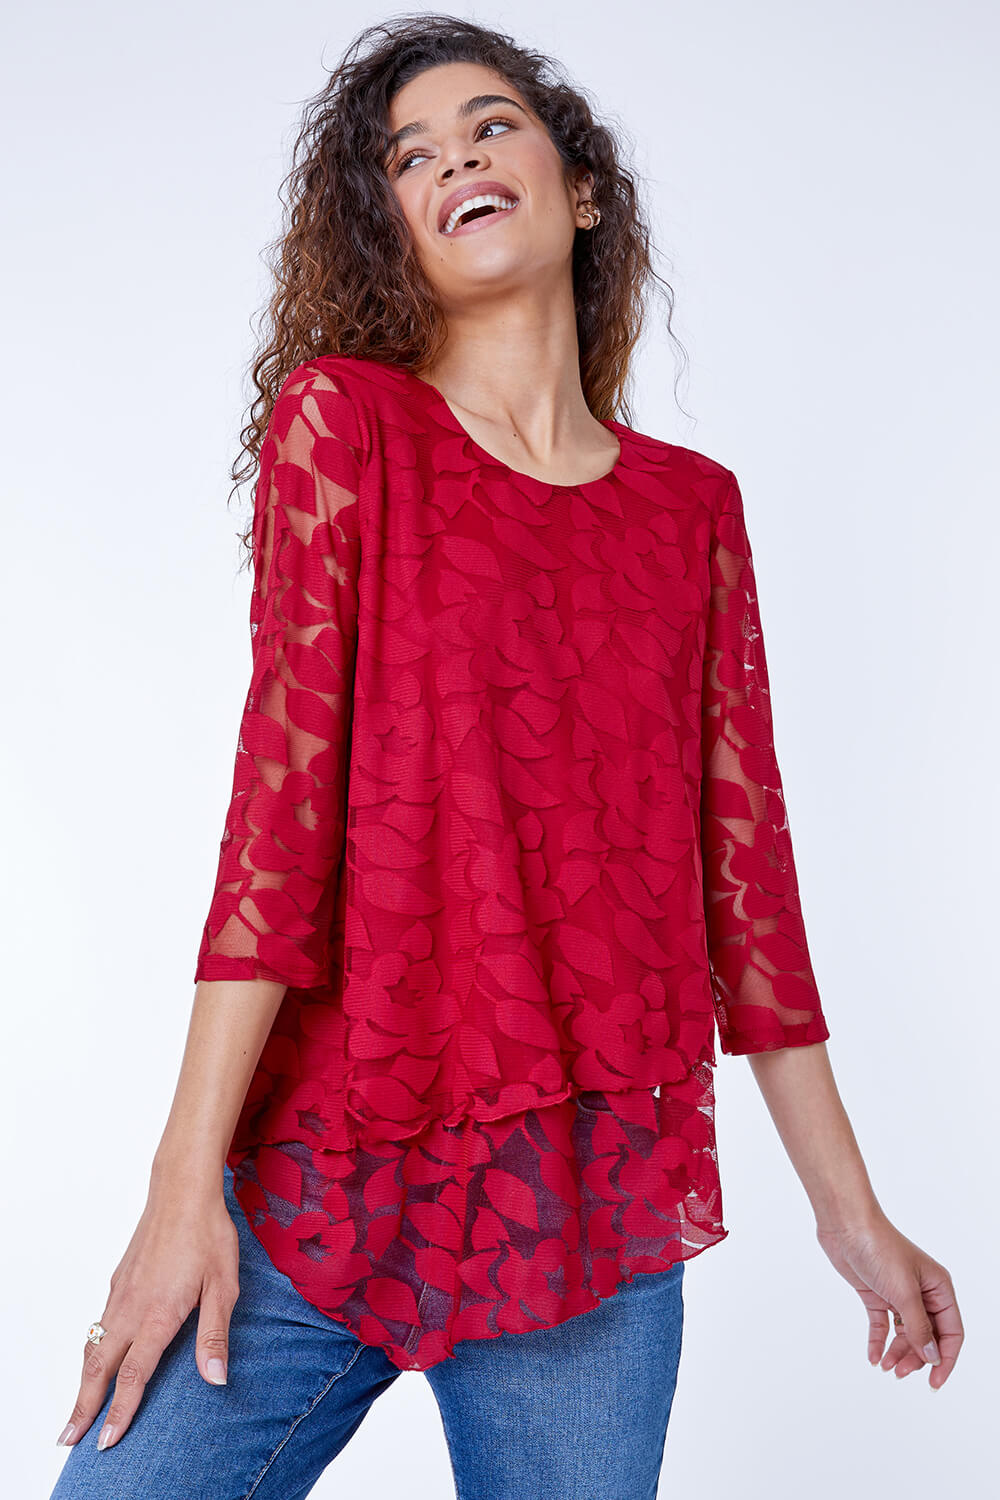 Red Burnout Leaf Asymmetric Stretch Top, Image 5 of 5